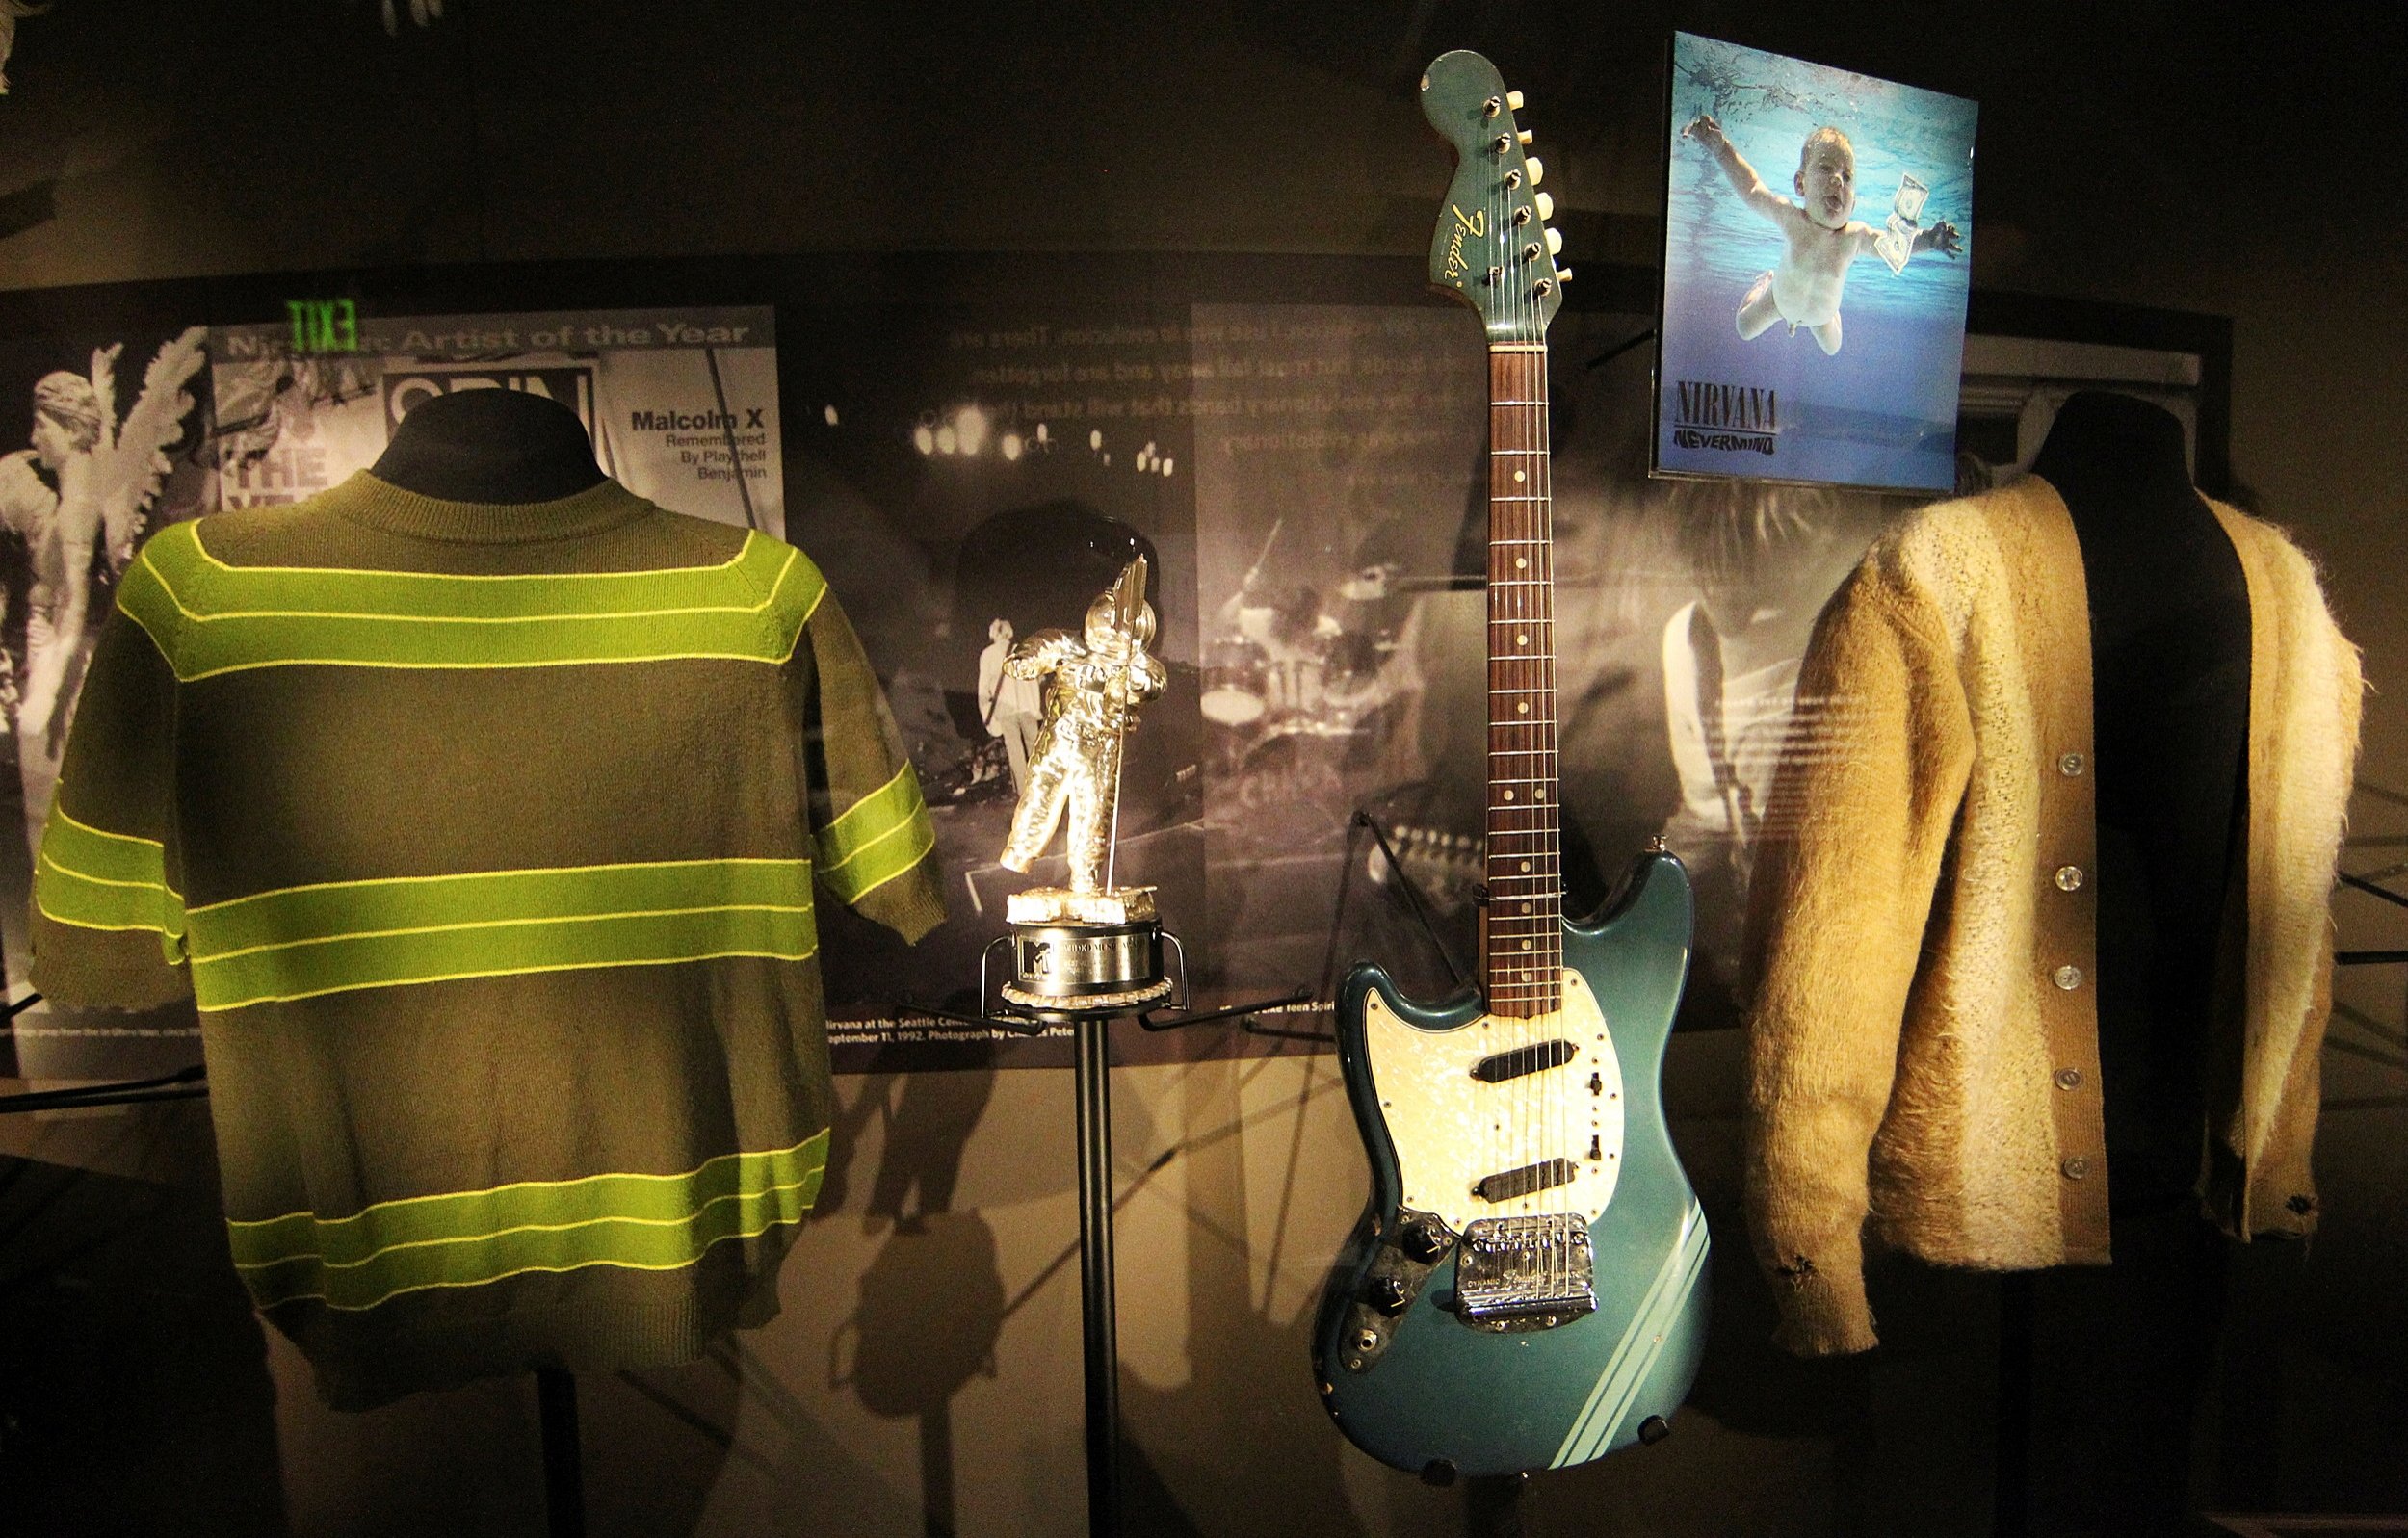 Memorabilia including iconic clothing and musical instruments of the late Kurt Cobain of the legendary grunge band Nirvana, on display at the 